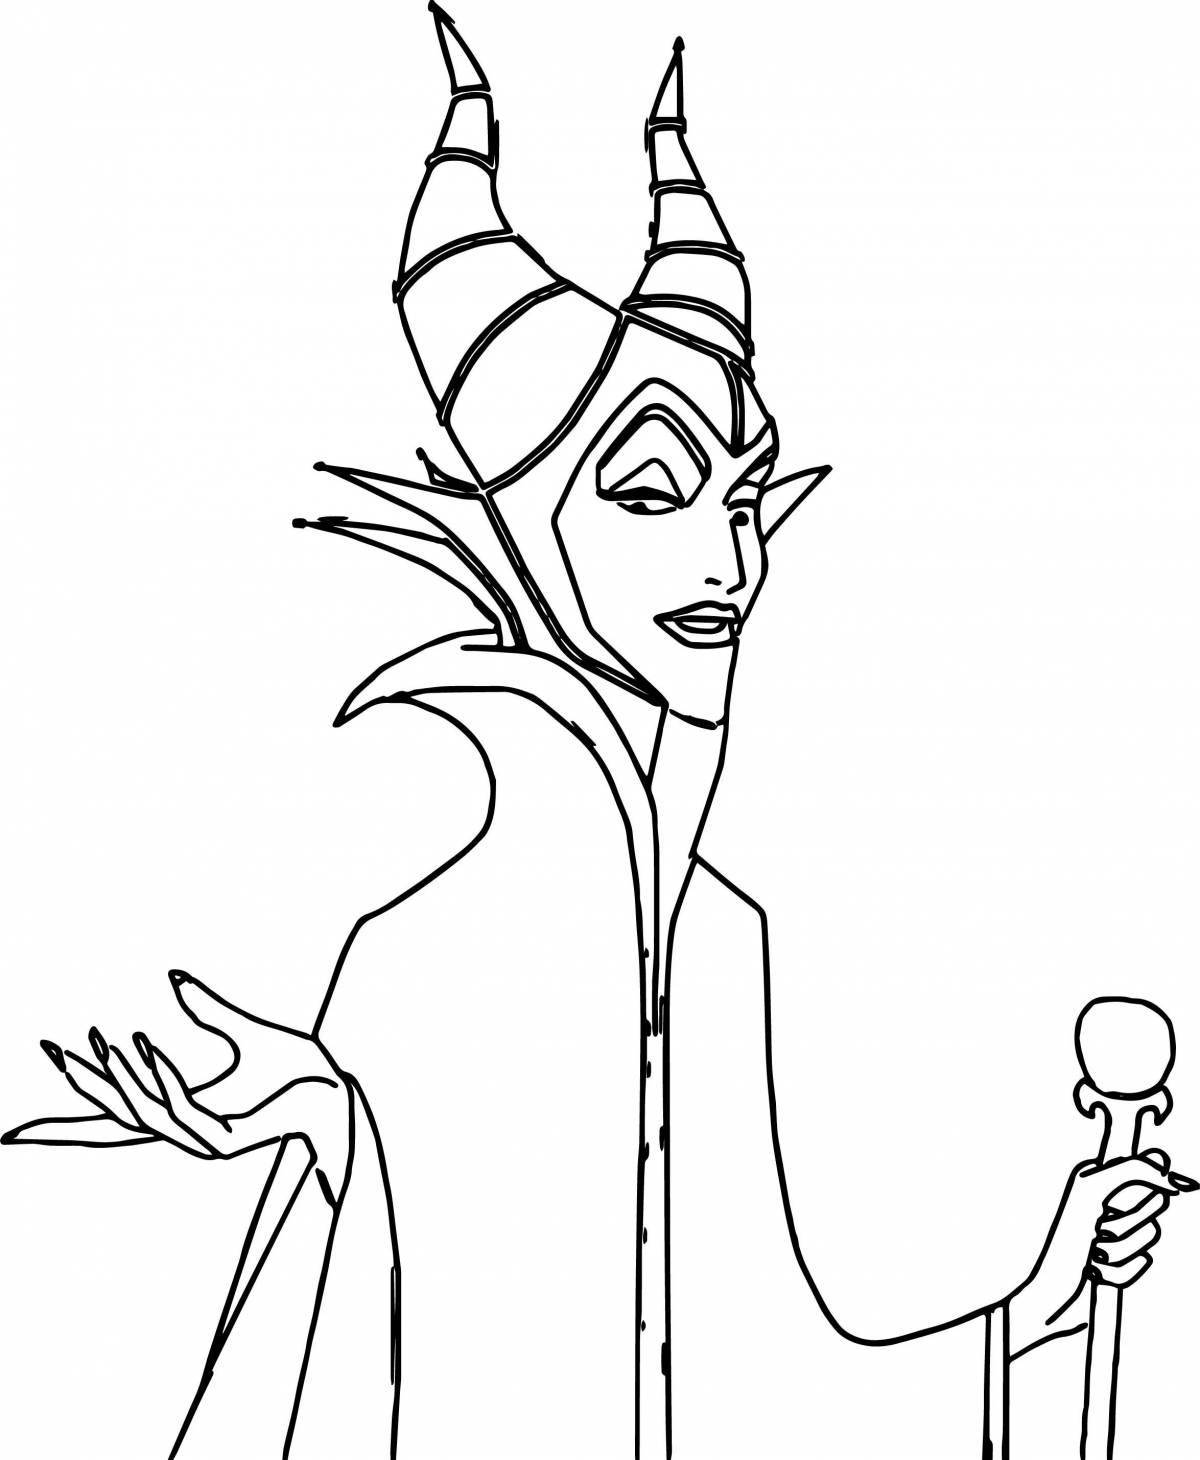 Adorable maleficent coloring book for kids